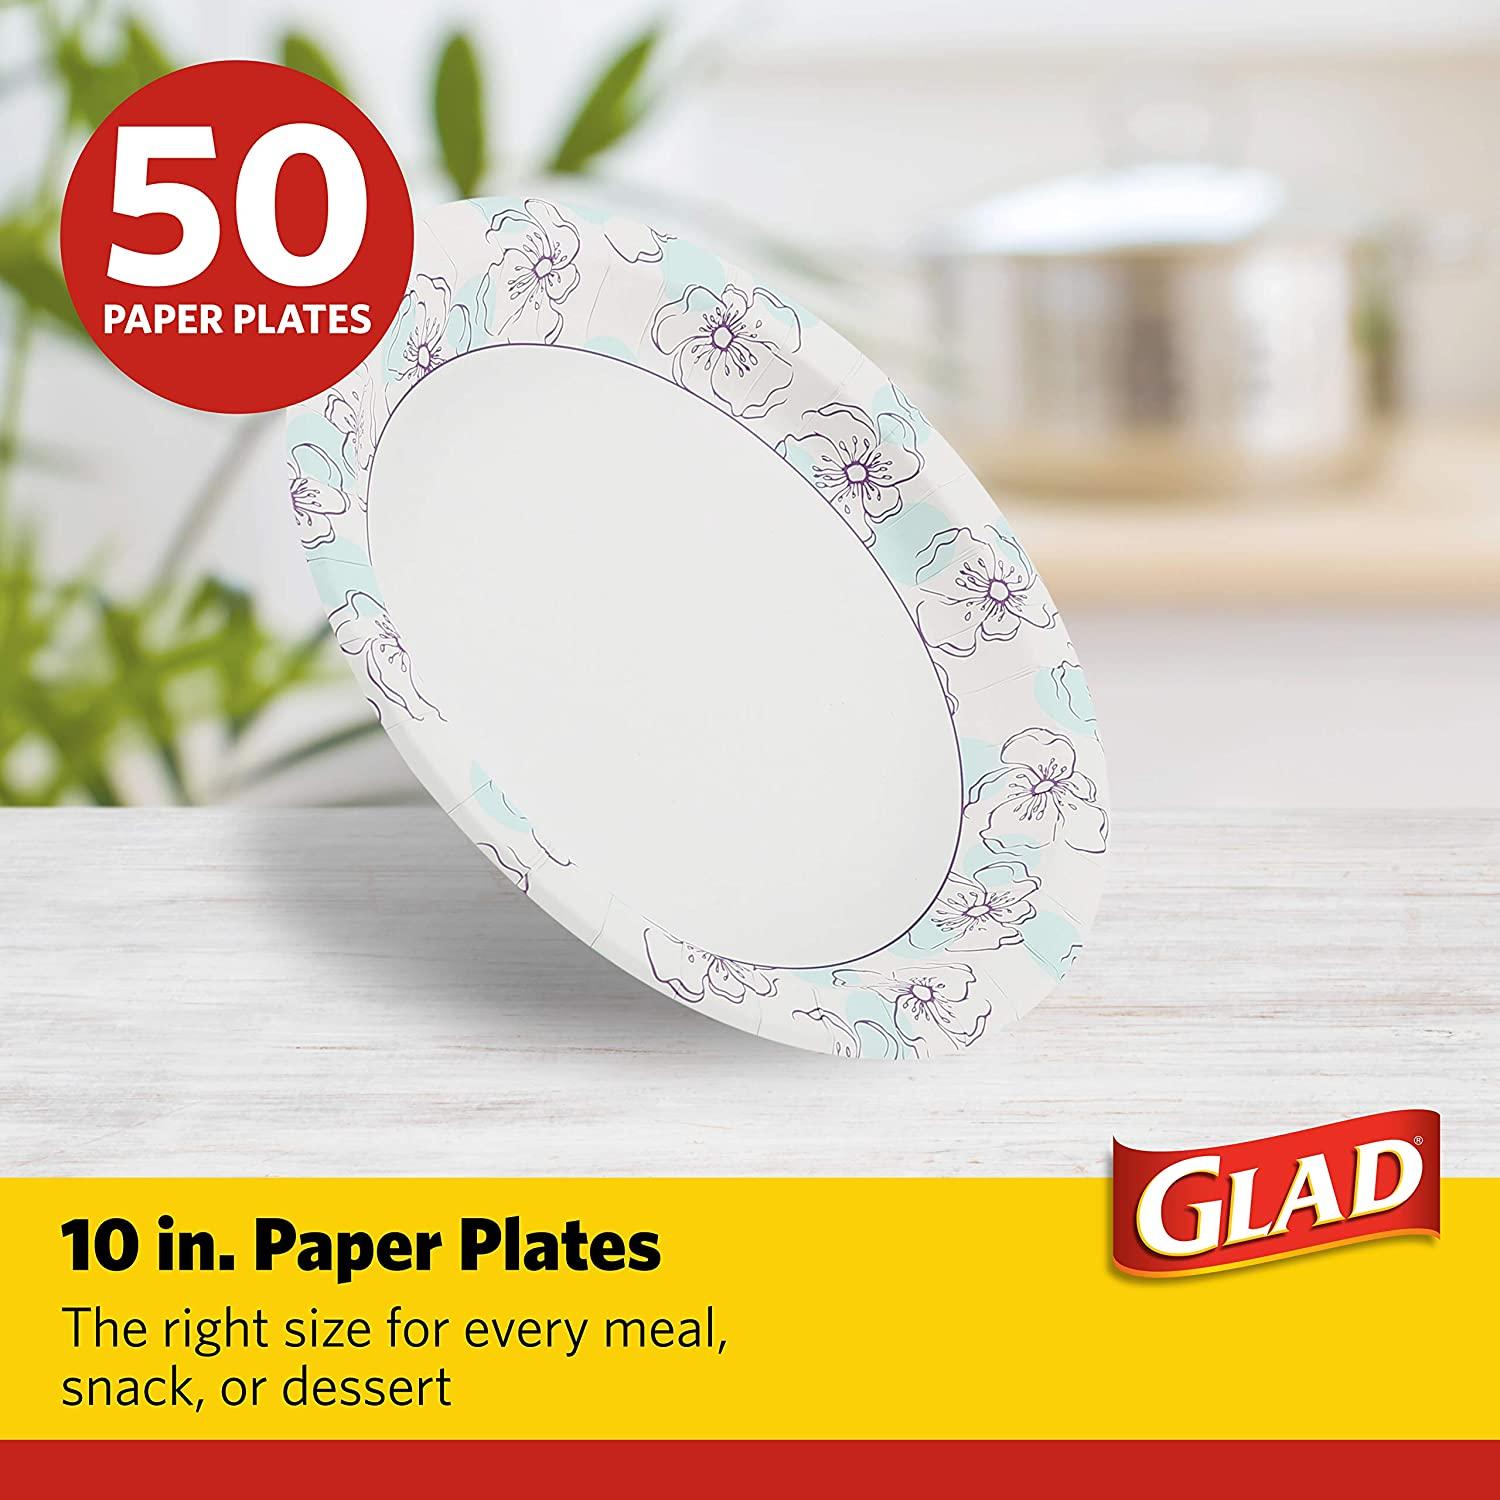 Glad Round Disposable Paper Plates 10 in, Blue Flower, Soak Proof, Cut  Proof, Microwave Safe Heavy Duty Paper Plates 10